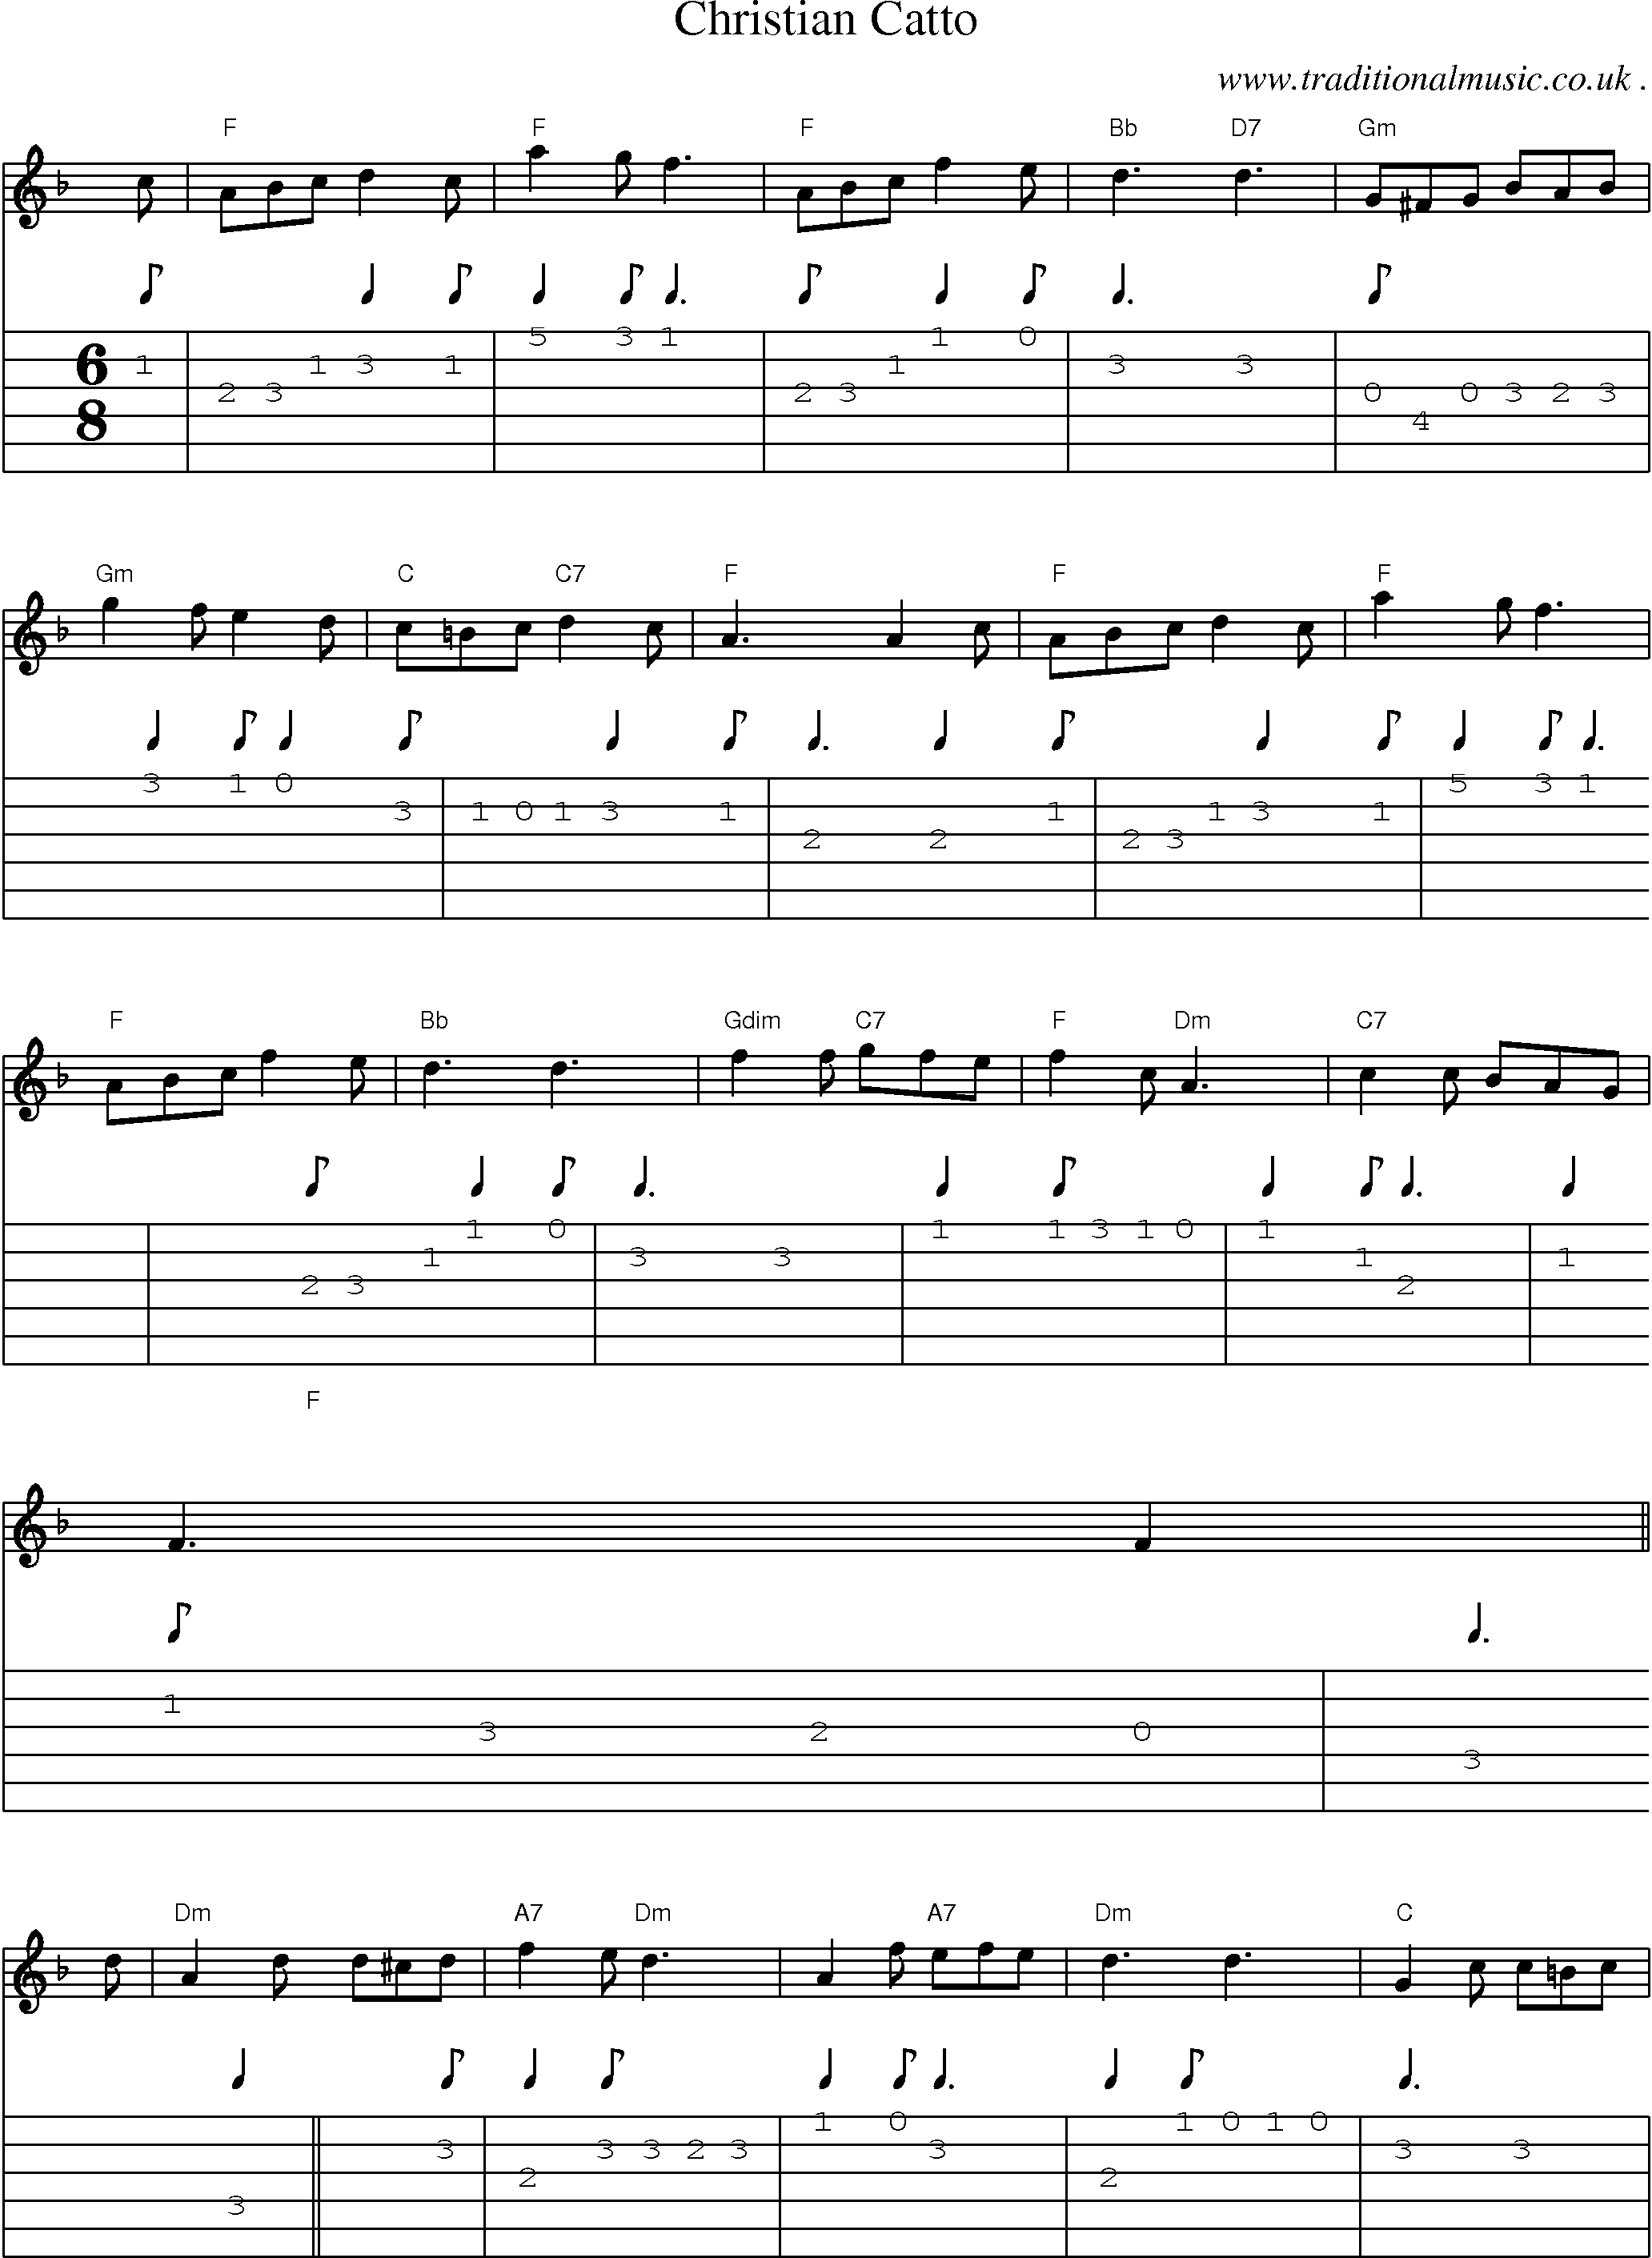 Sheet-music  score, Chords and Guitar Tabs for Christian Catto